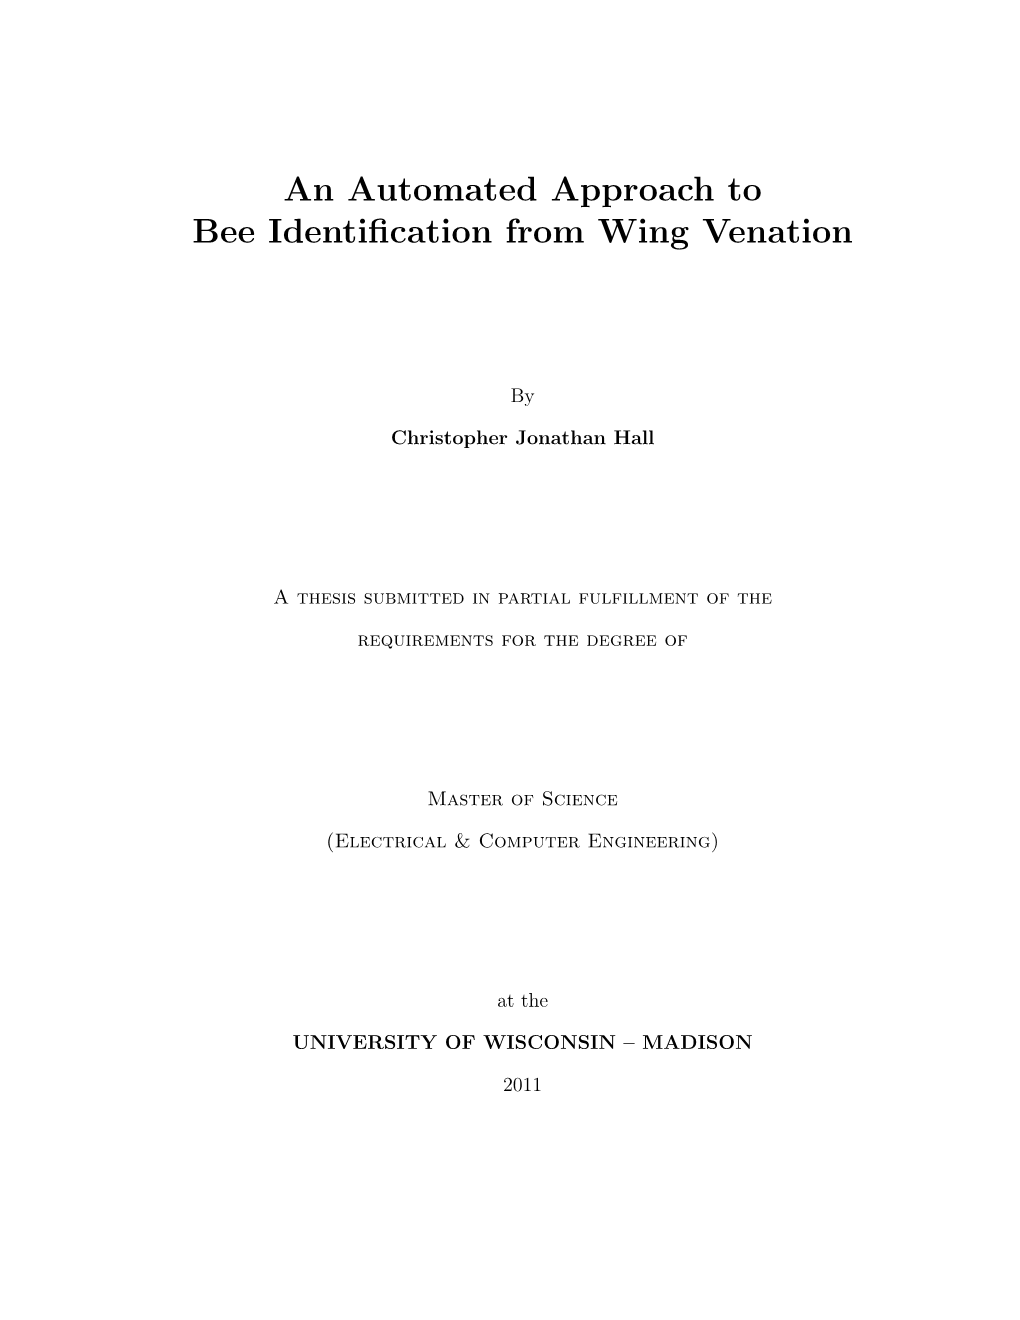 An Automated Approach to Bee Identification from Wing Venation